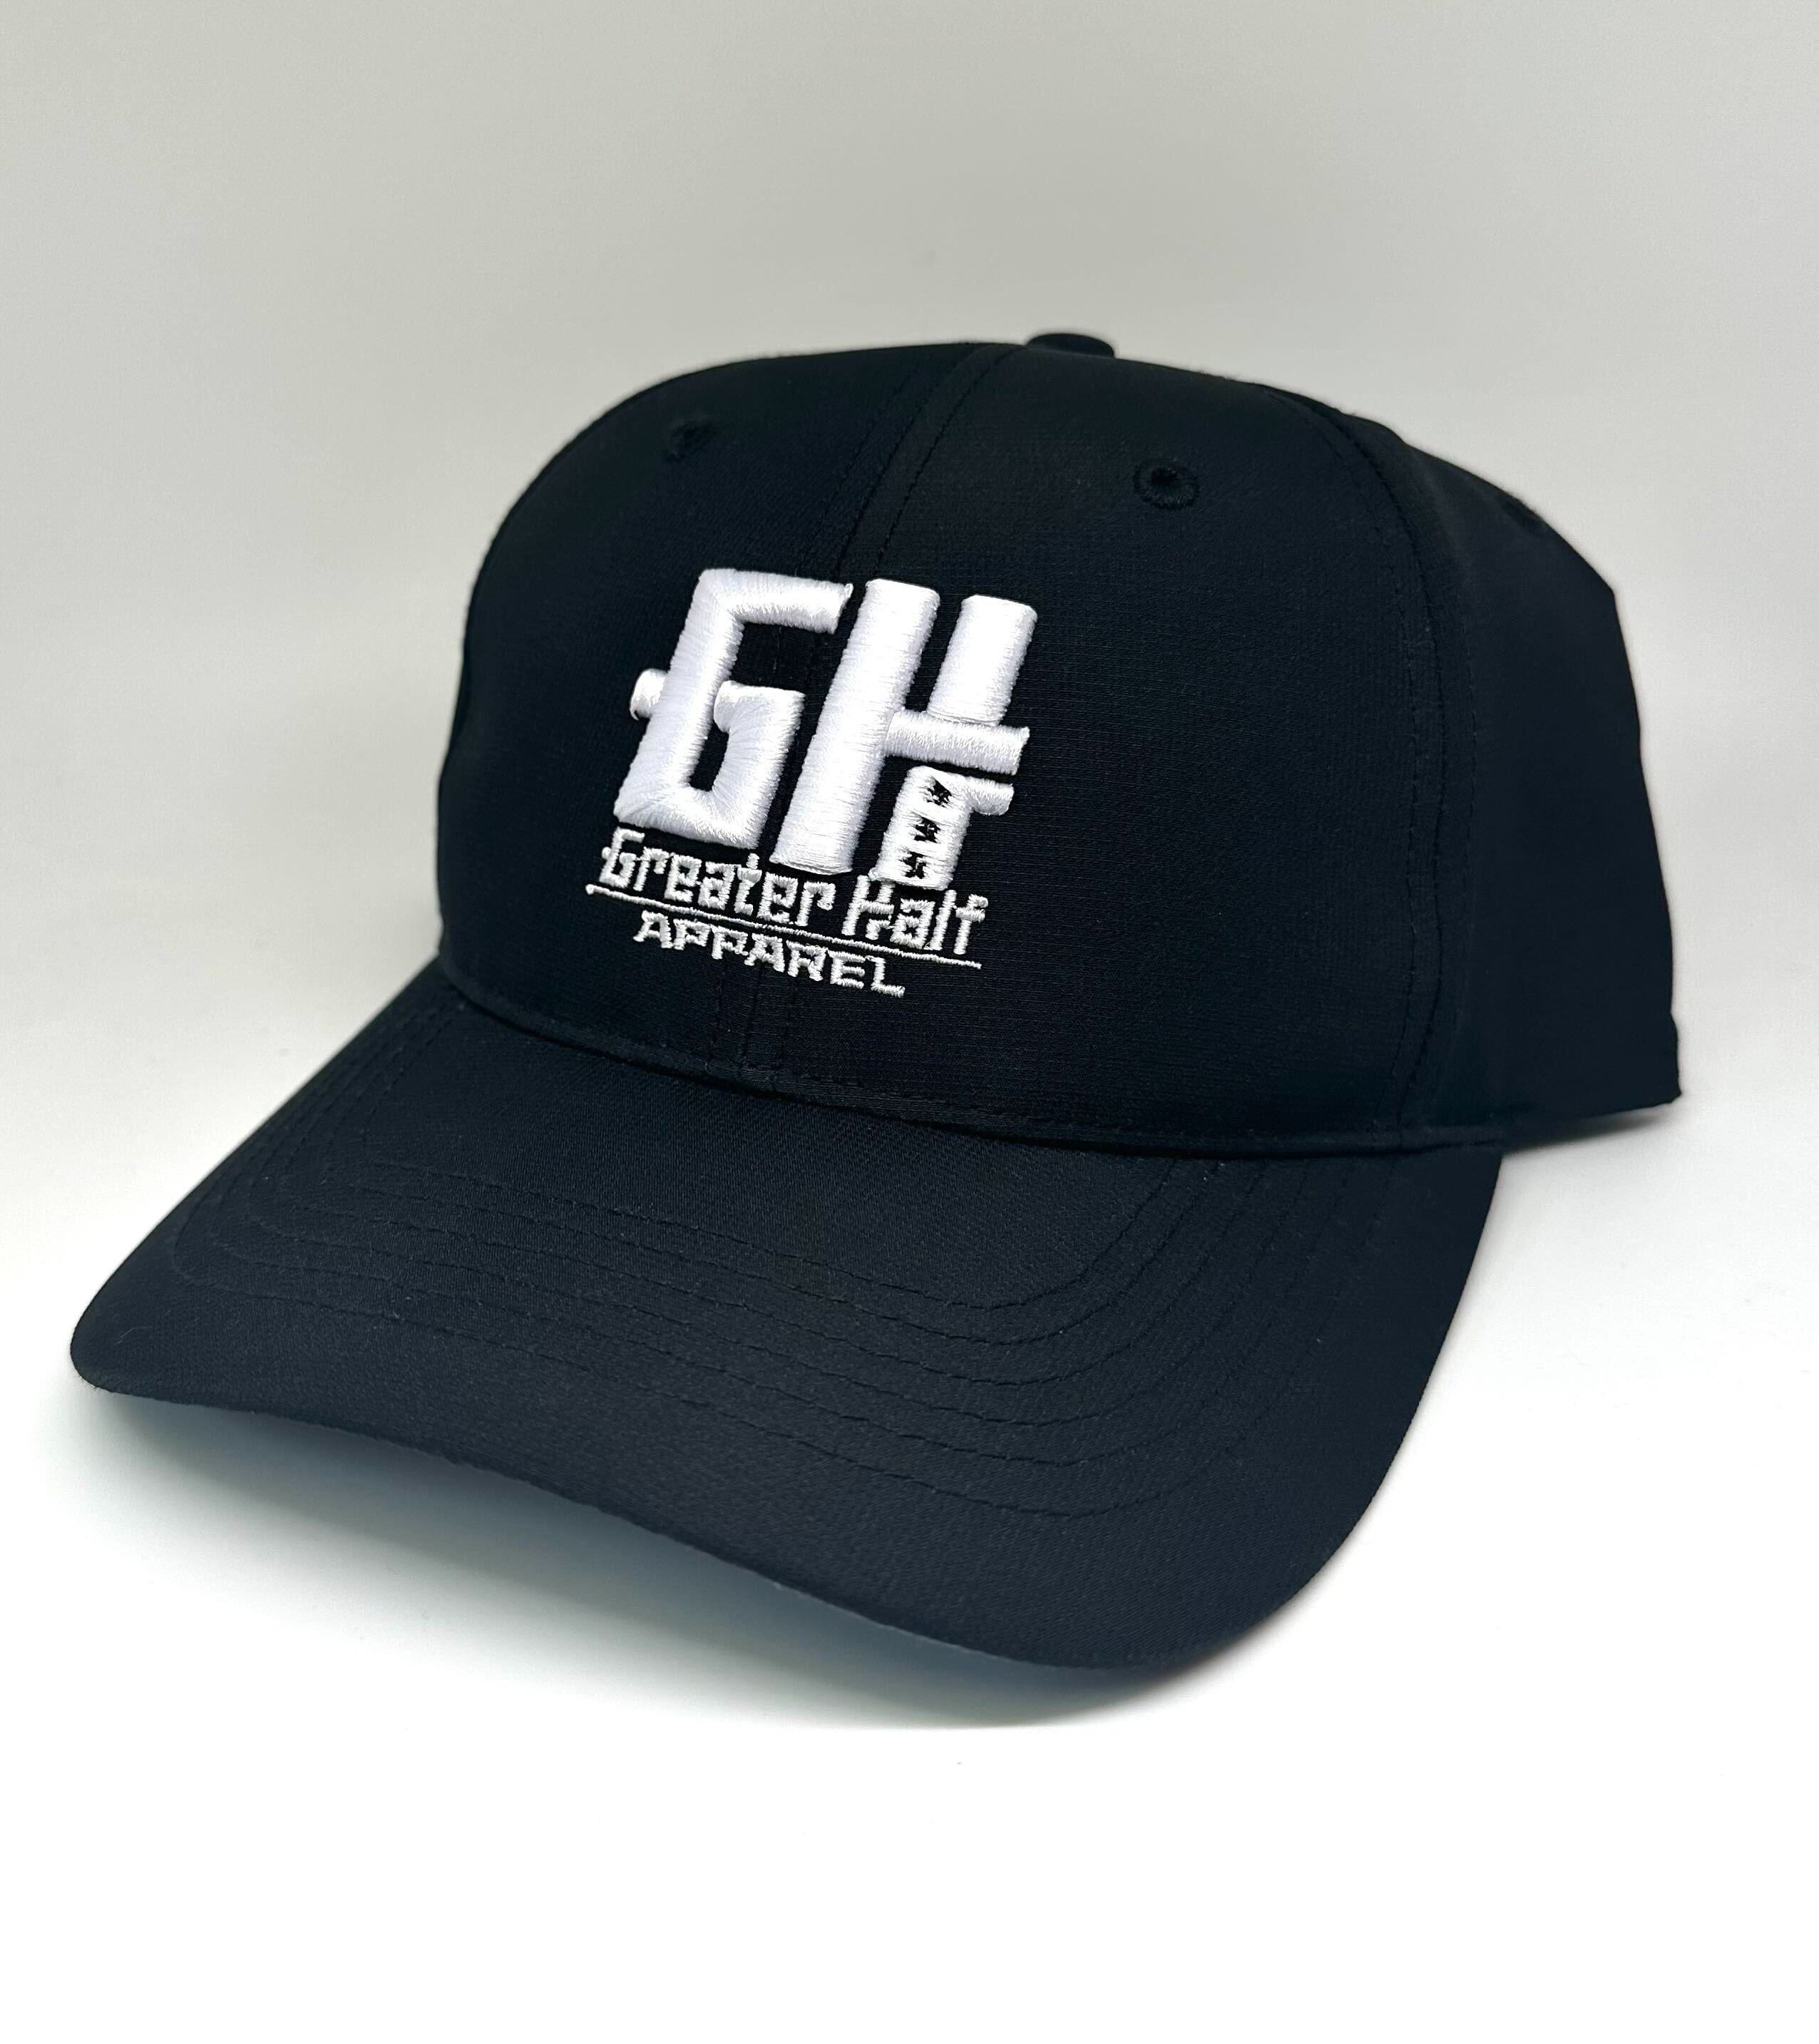 Thumbnail for Greater Half 3D Golf Embroidered Hat - Greater Half